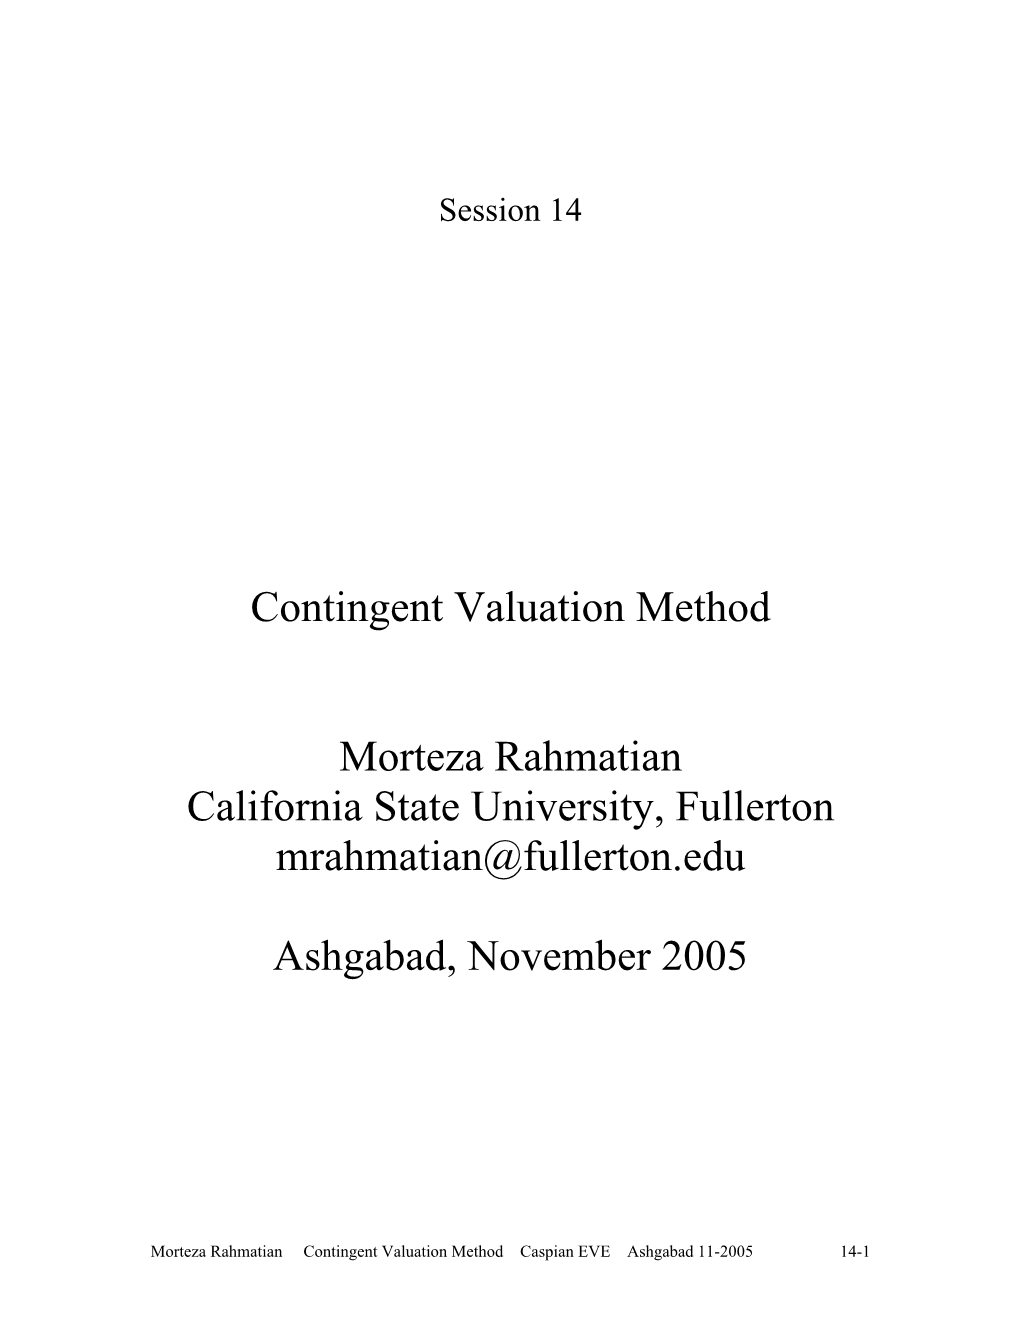 The Contingent Valuation Method (CVM)